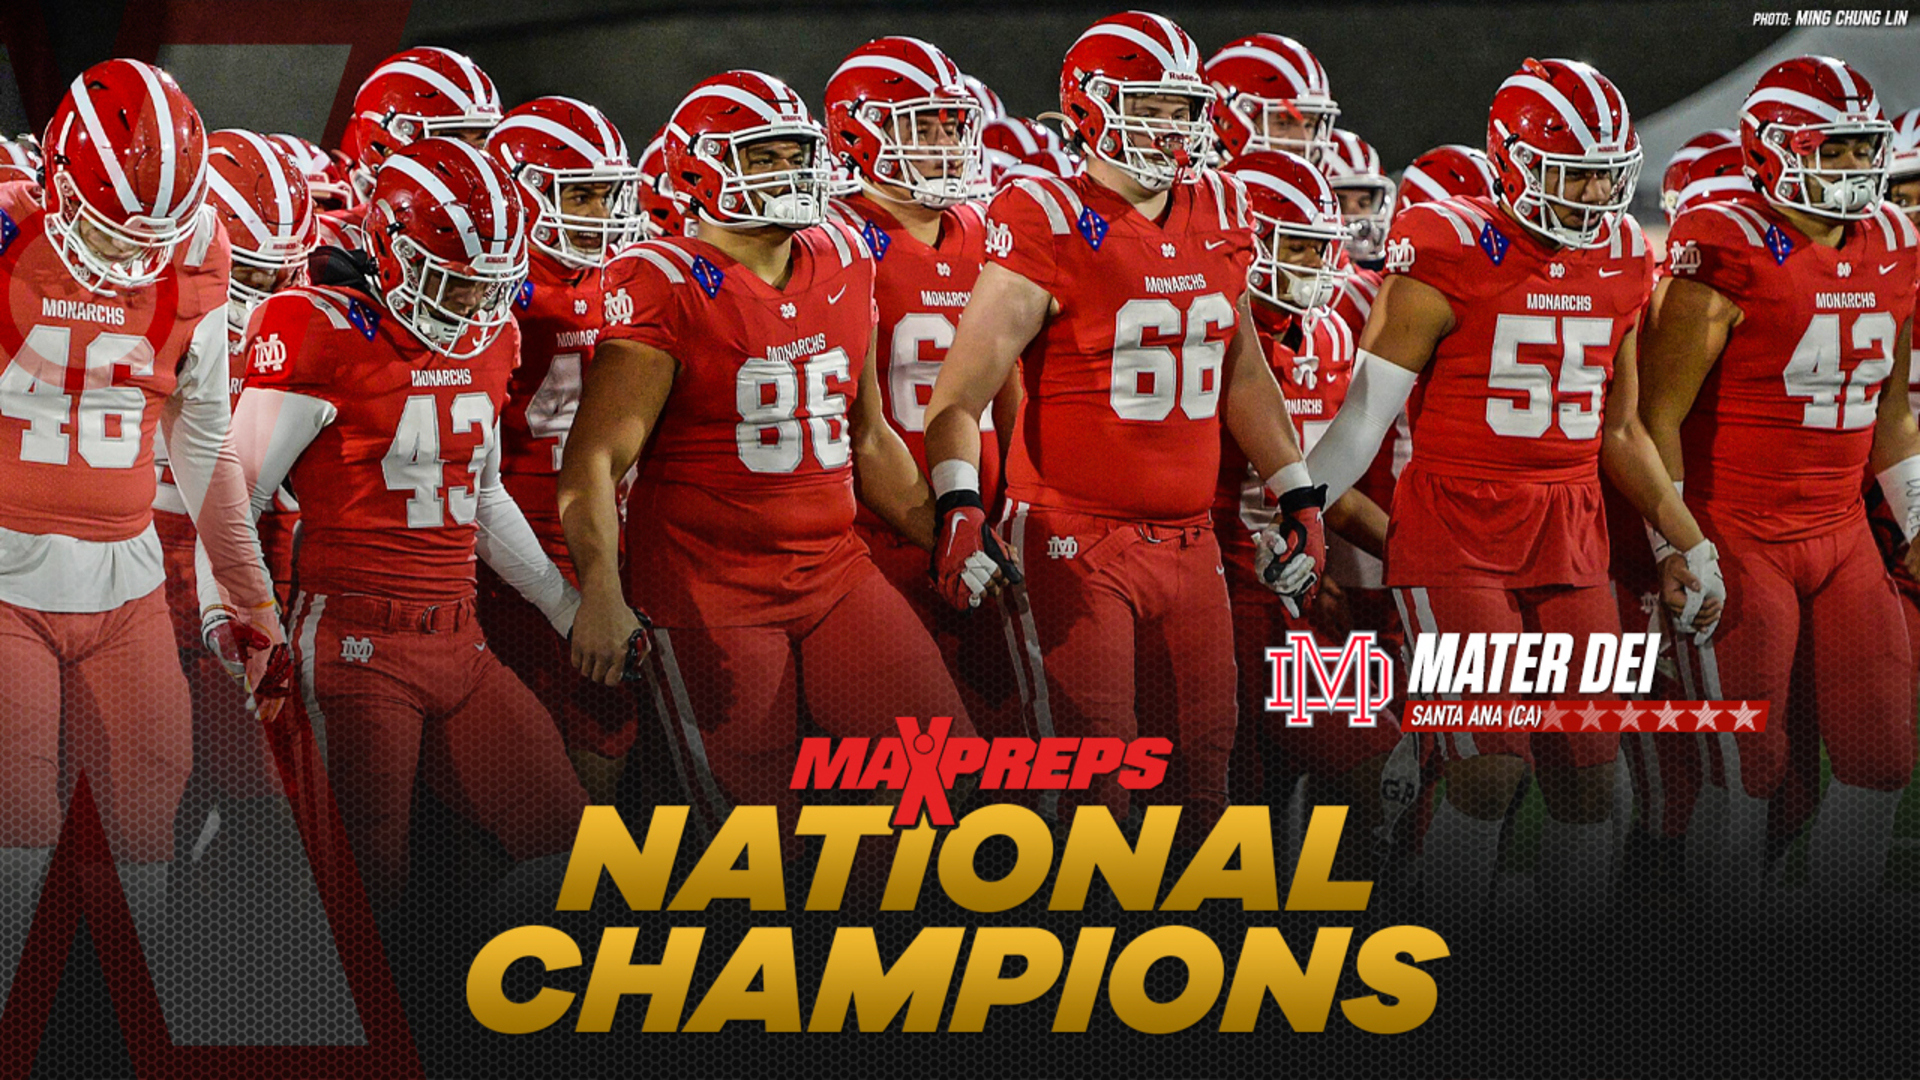 Final MaxPreps Top 25 high school football rankings: Mater Dei gos wire-to-wire as No. 1 team